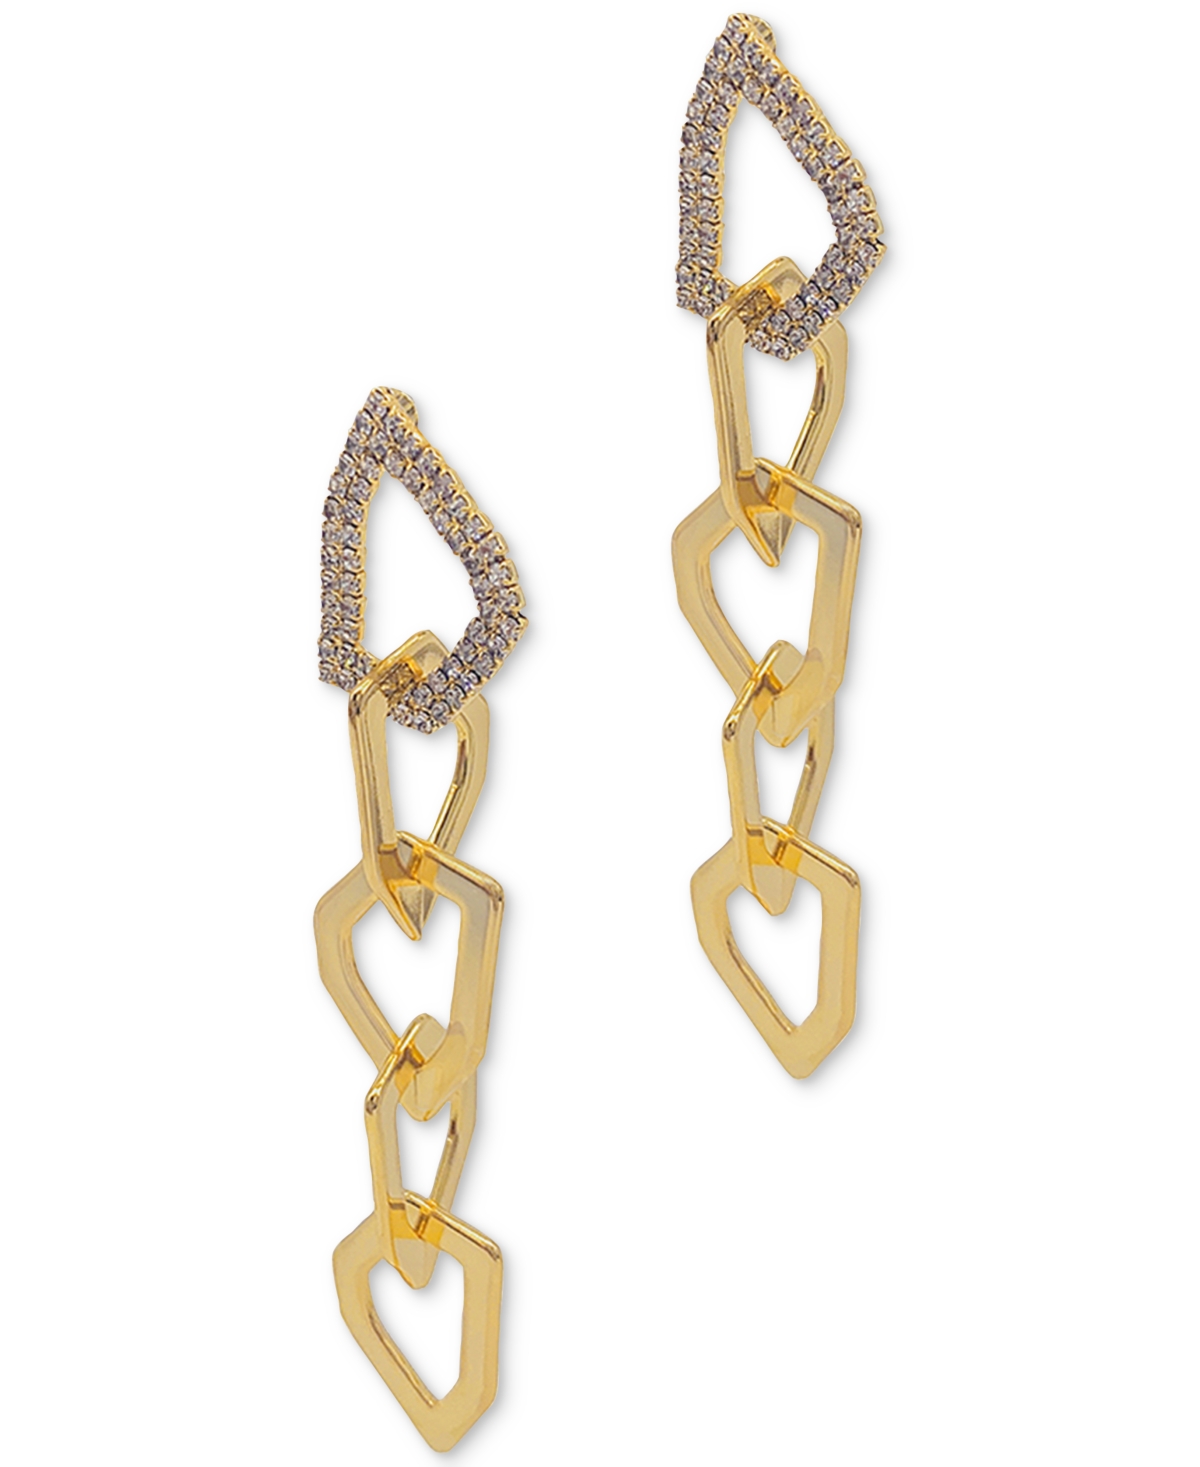 14k Gold-Plated Organic Link Drop Earrings - Gold